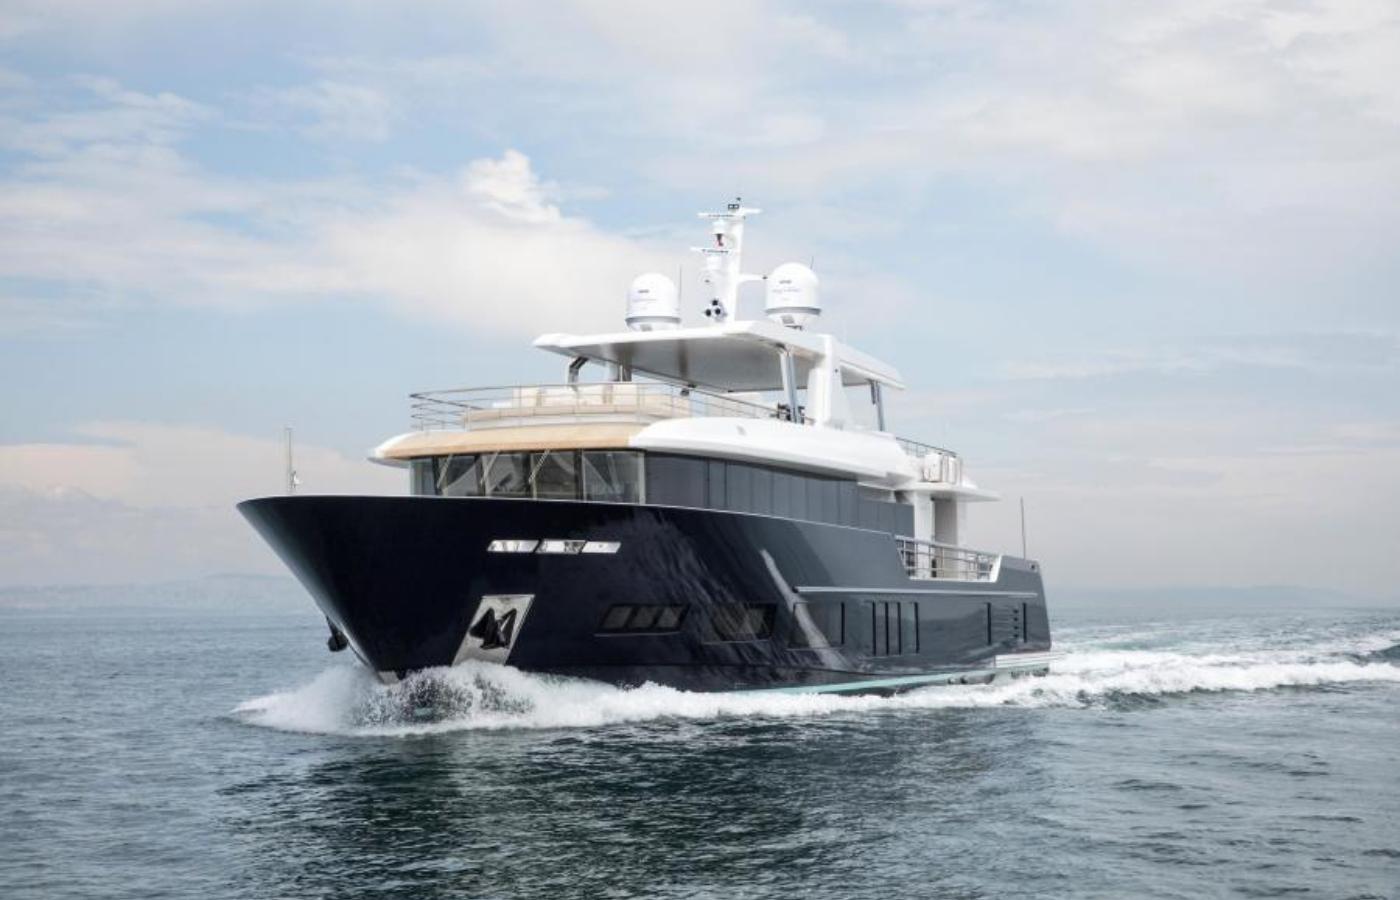 Tour of the “PICCOLO” the 38 metre megayacht by Alpha Yachts [In the News]